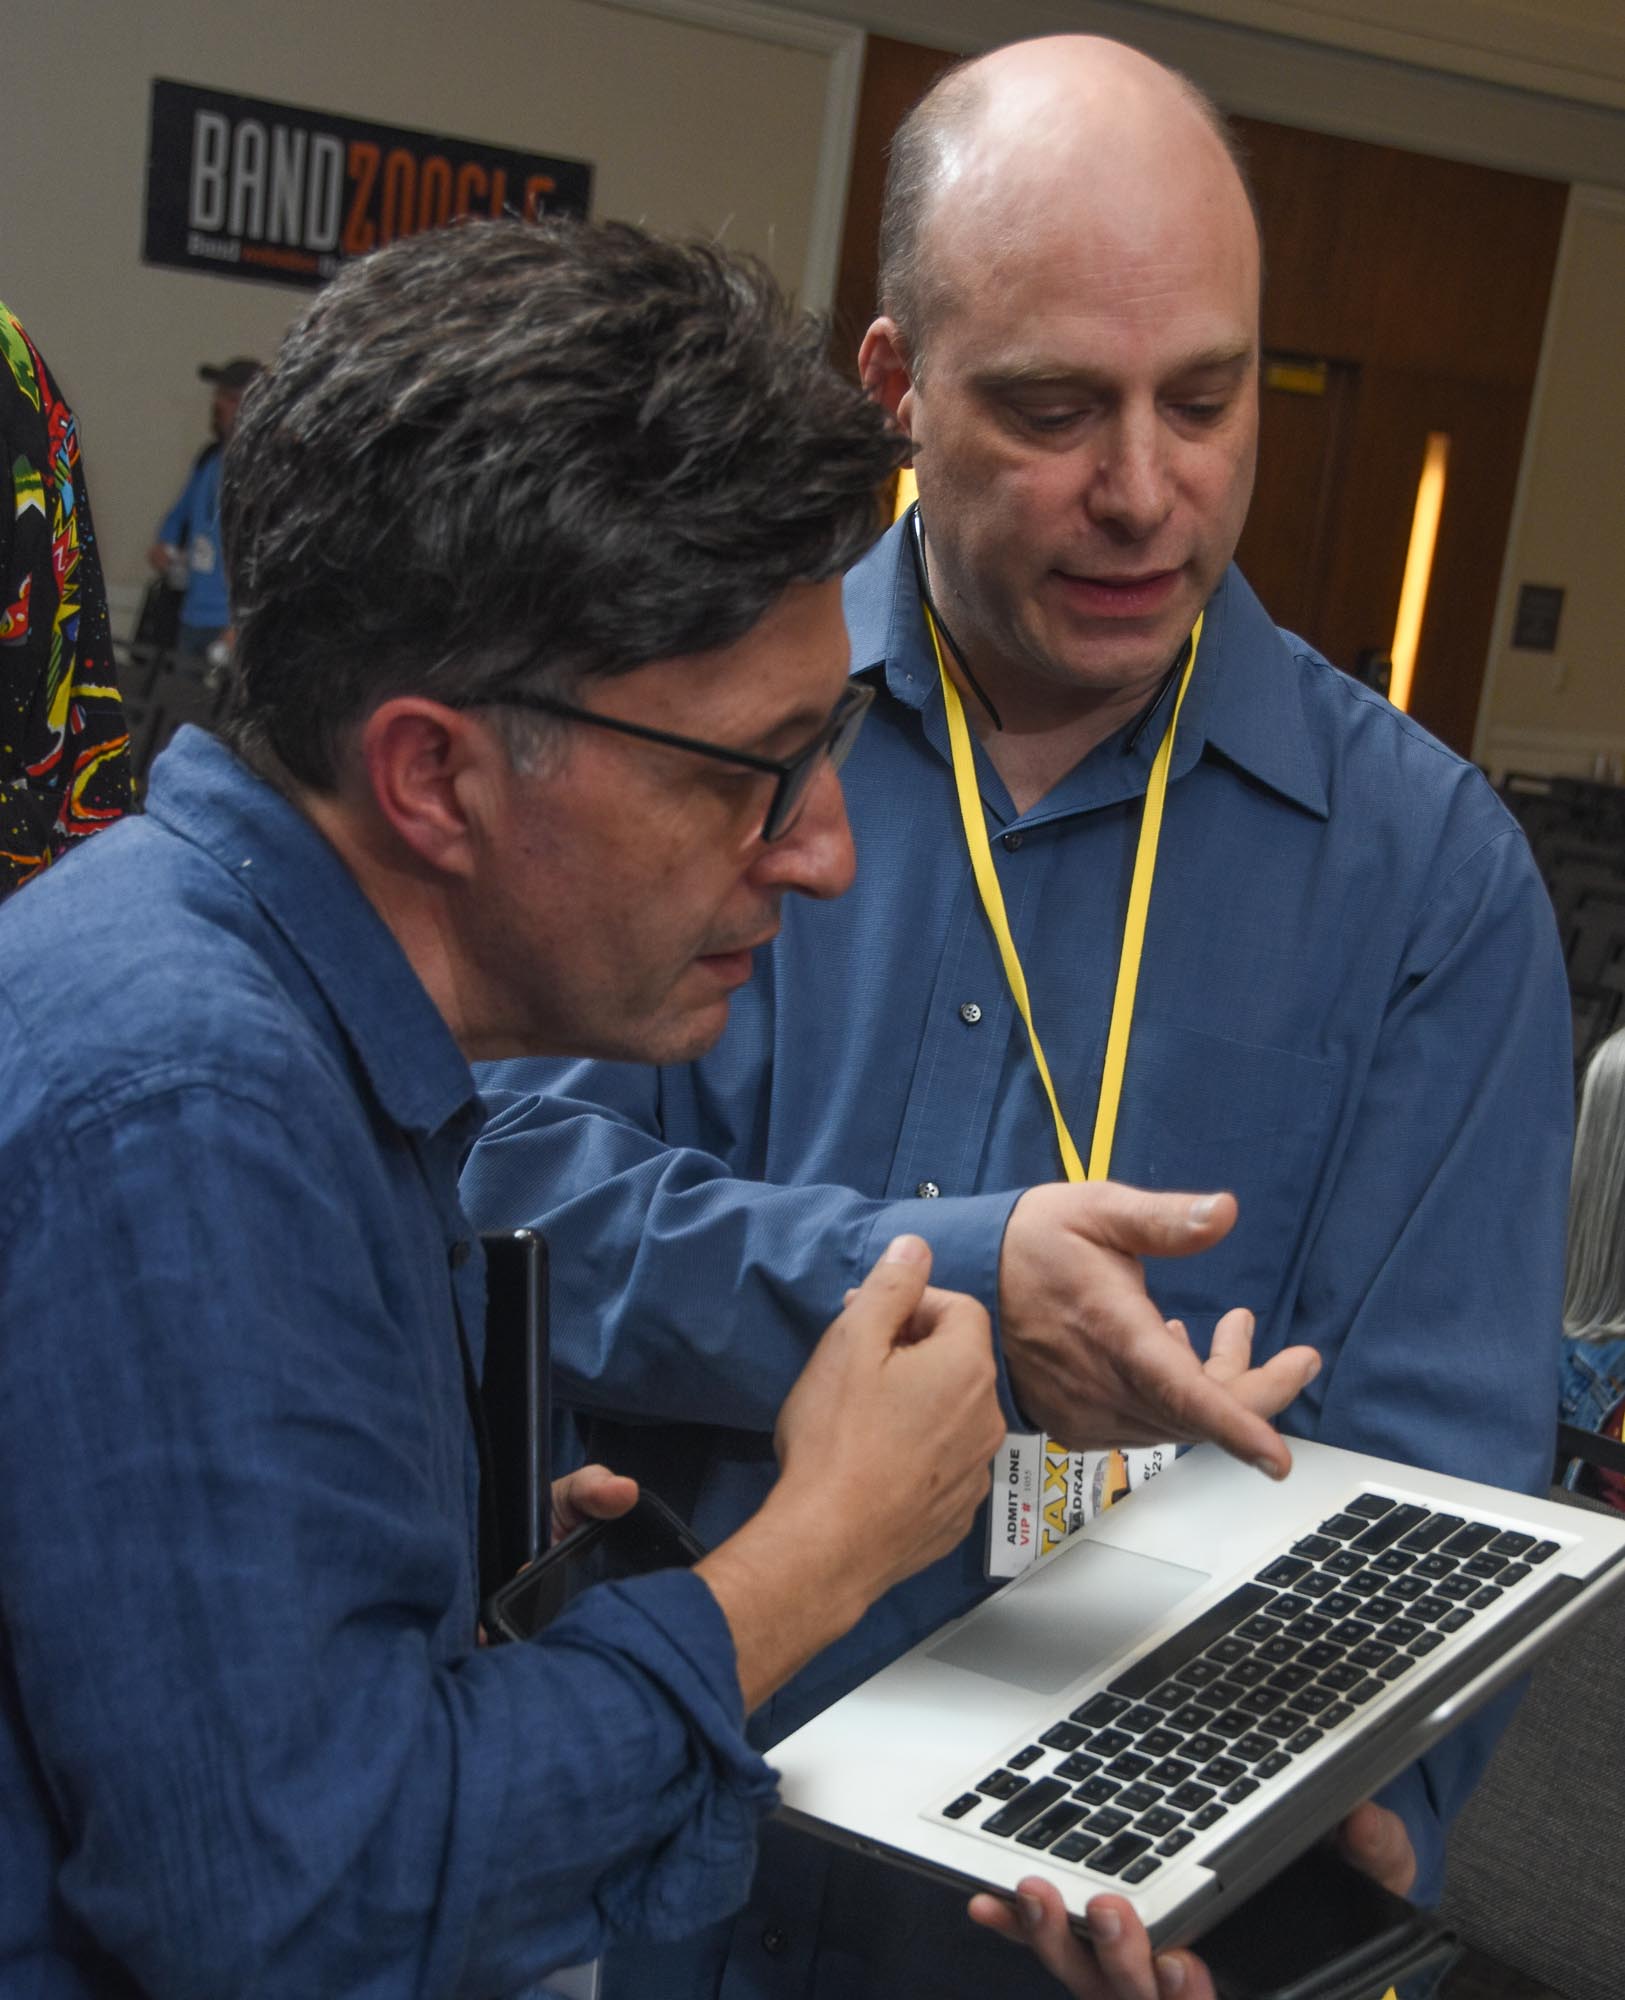 Composer, Adonis Aletras discusses film scoring with a member whose name on his badge we can almost see.